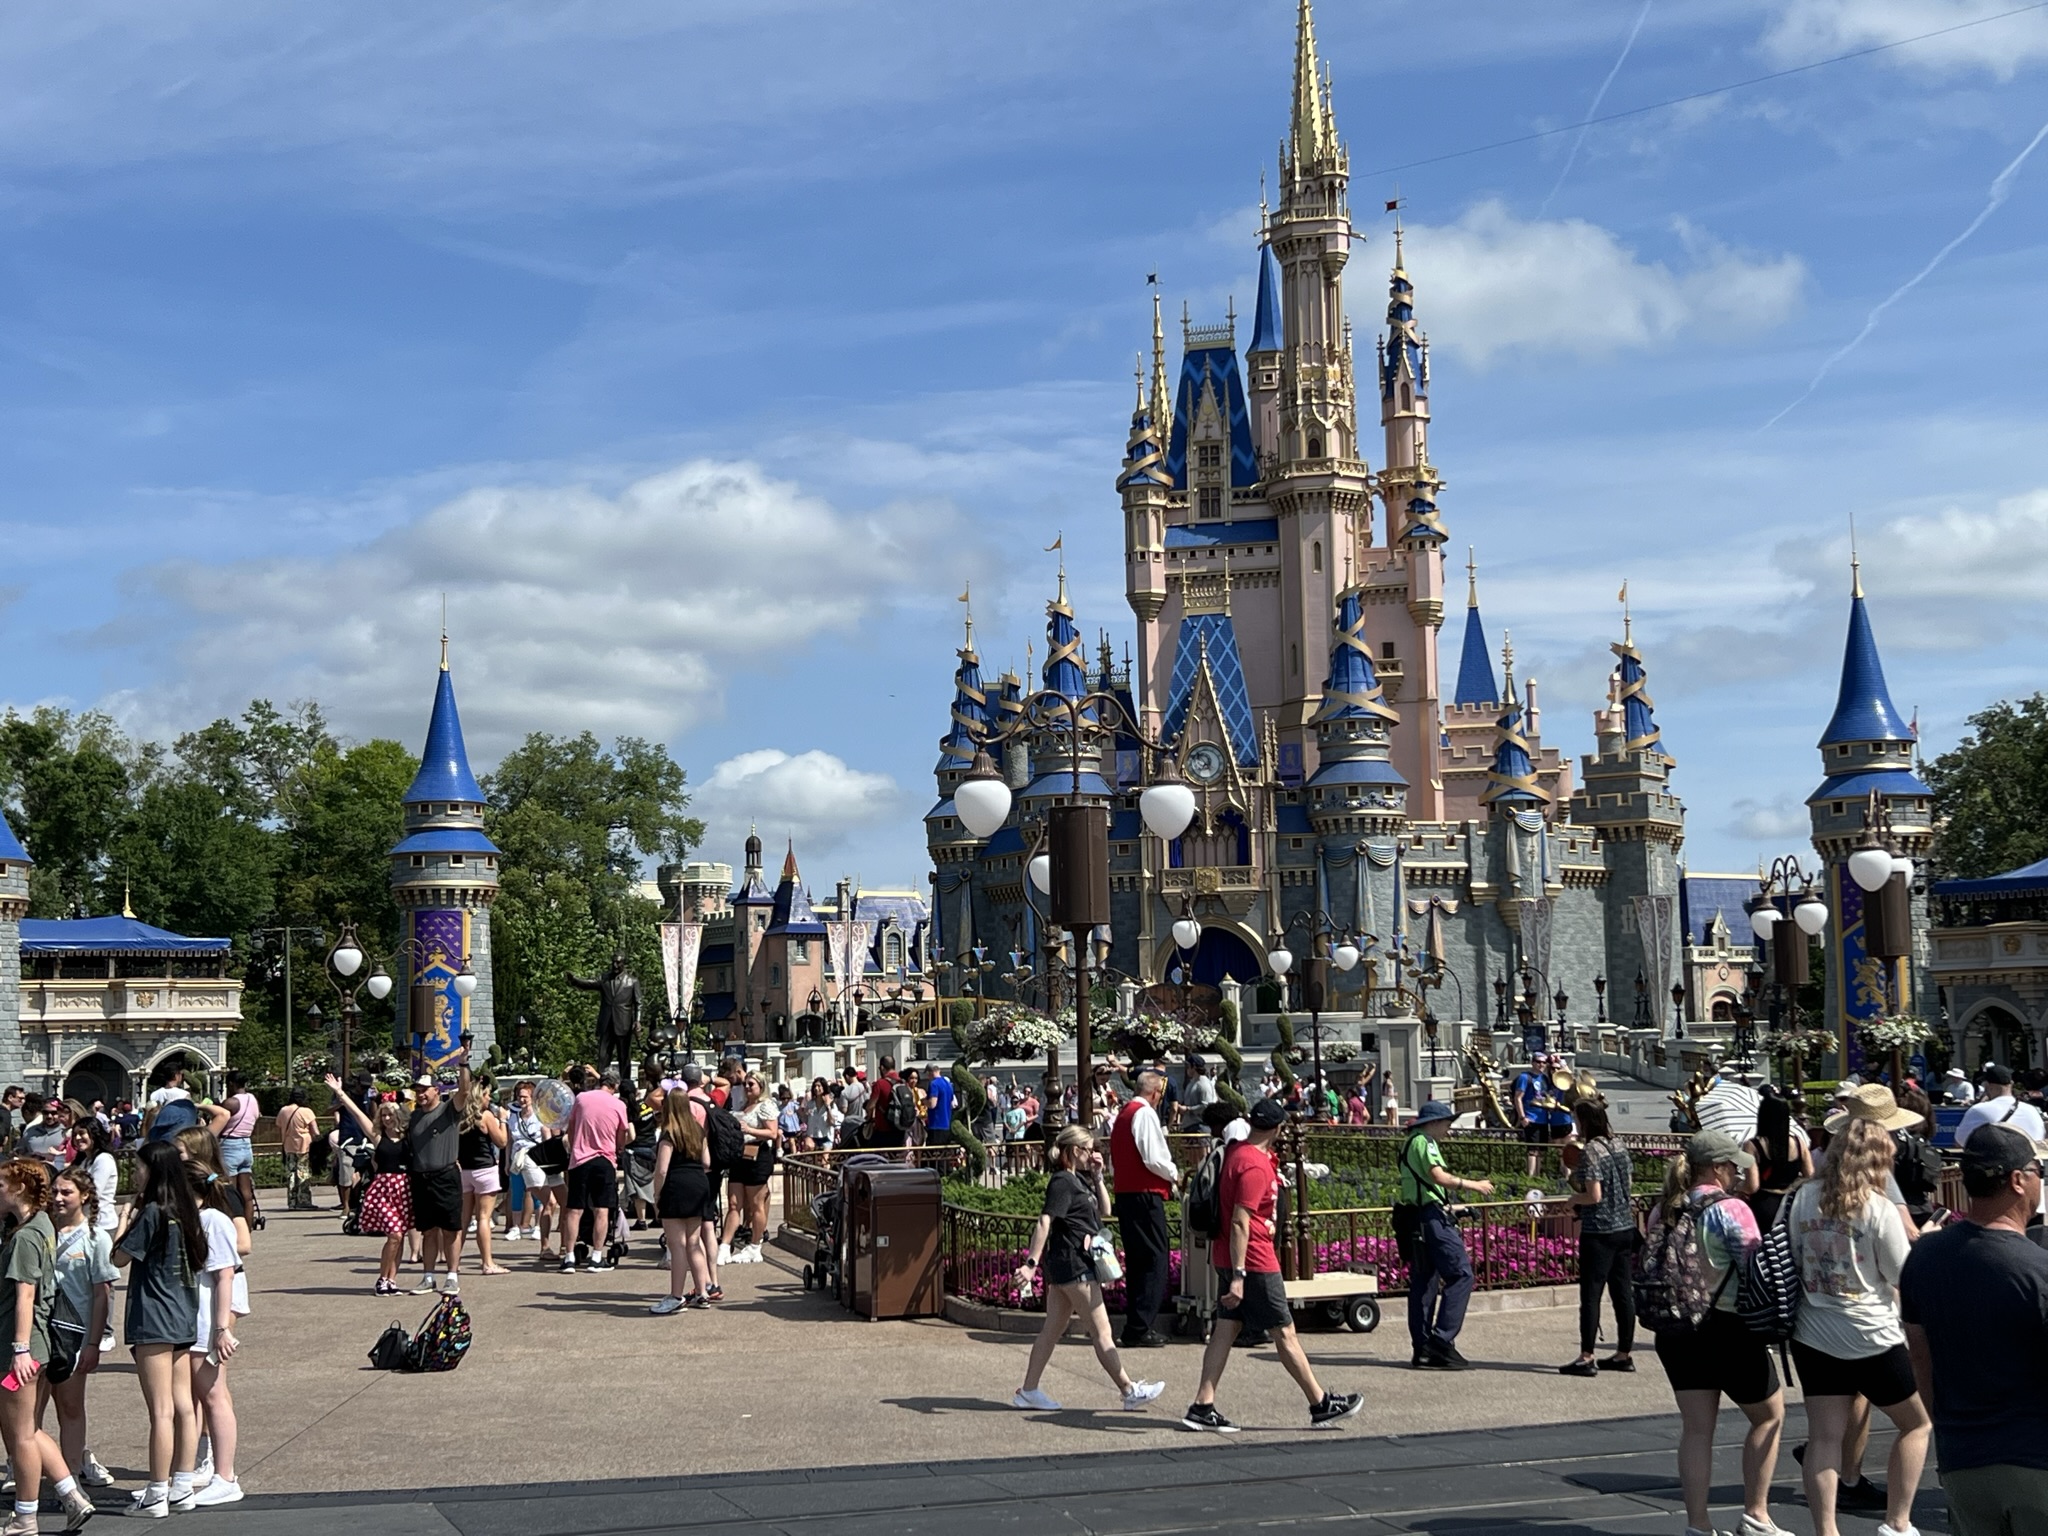 In May 2023, we take you along for the sights and sounds of a full day park experience at Walt Disney World Resort's Magic Kingdom Park while on a cruise excursion in Orlando, Florida.